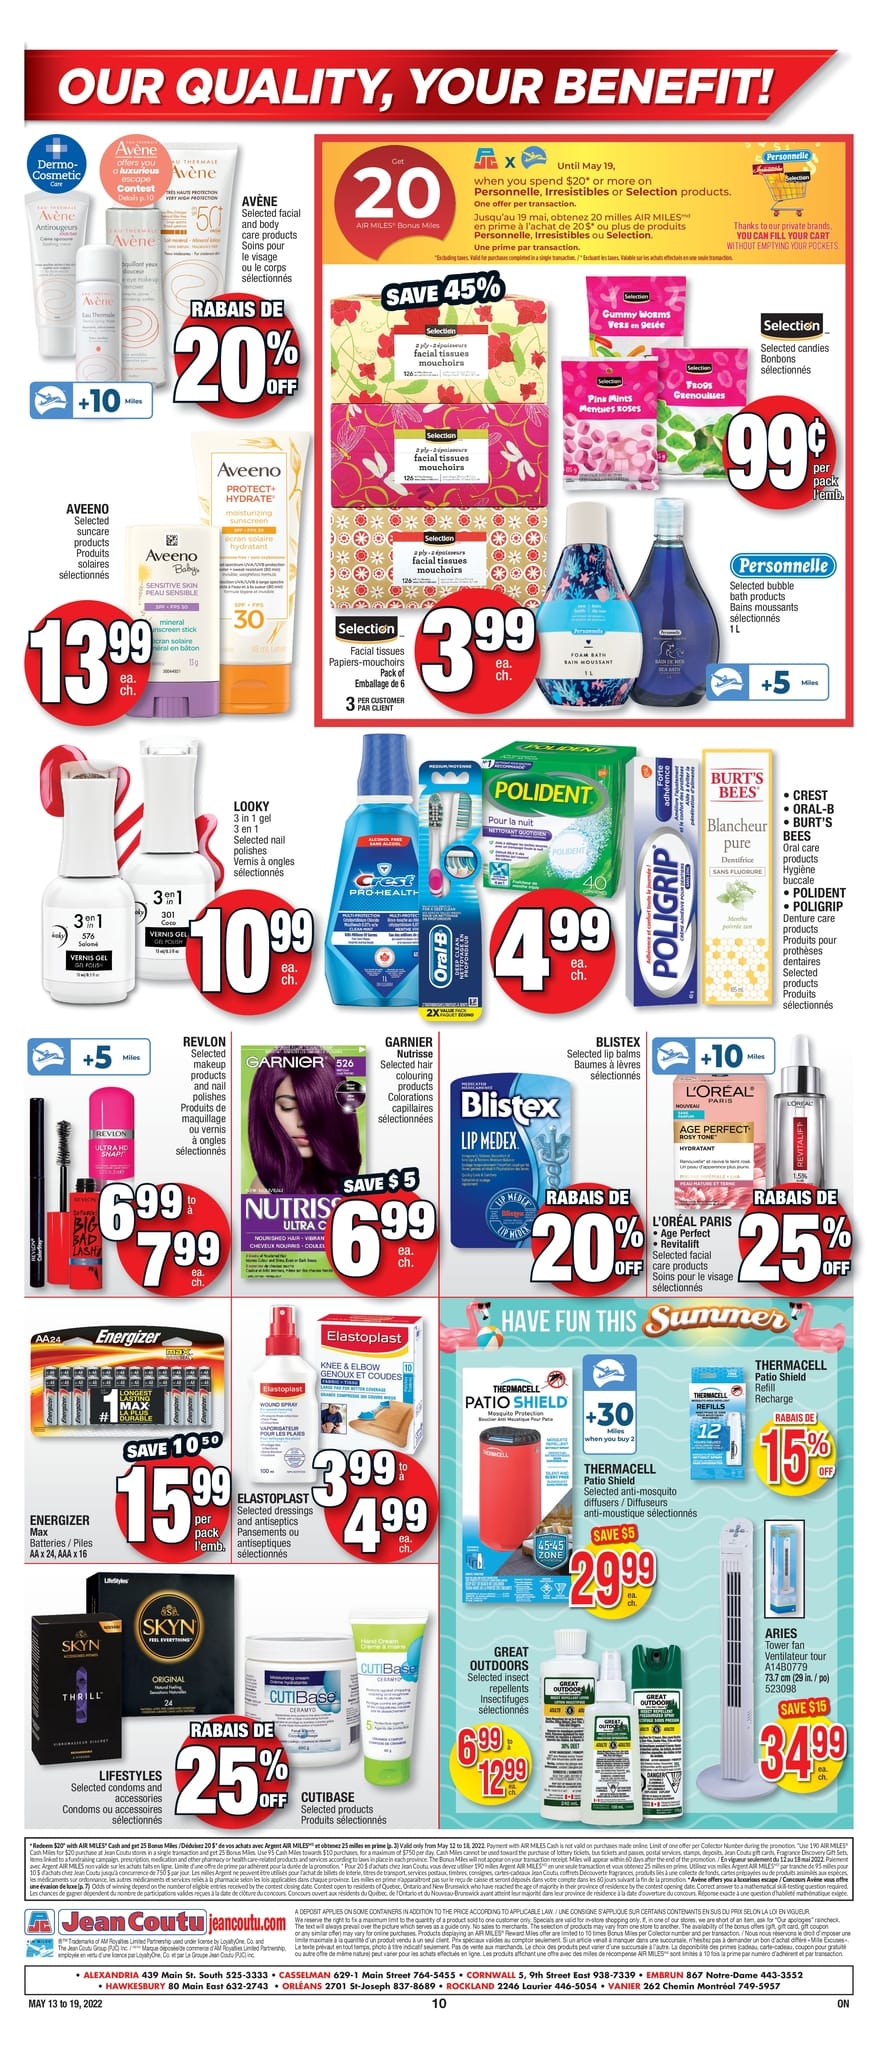 Jean Coutu - Weekly Flyer Specials - Page 2